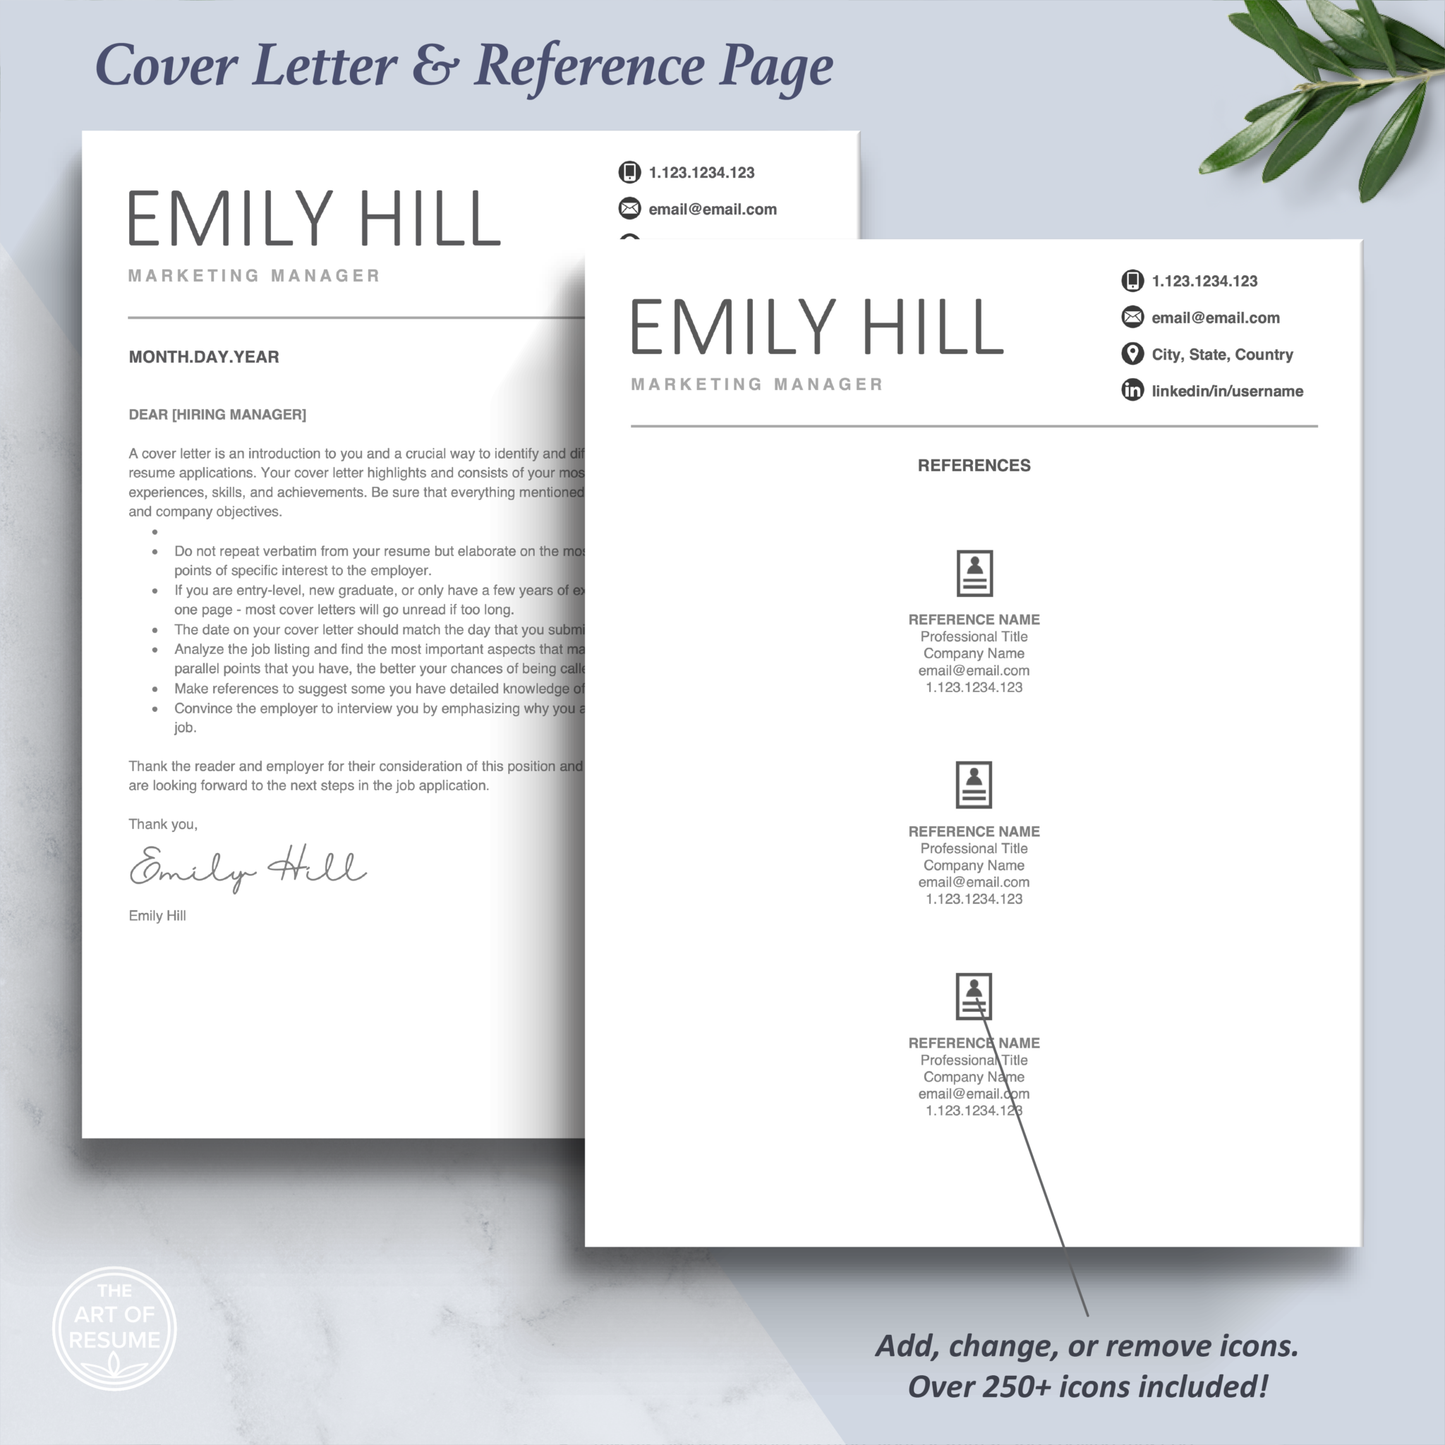 Professional Cover Letter and Reference Page Design Templates Download